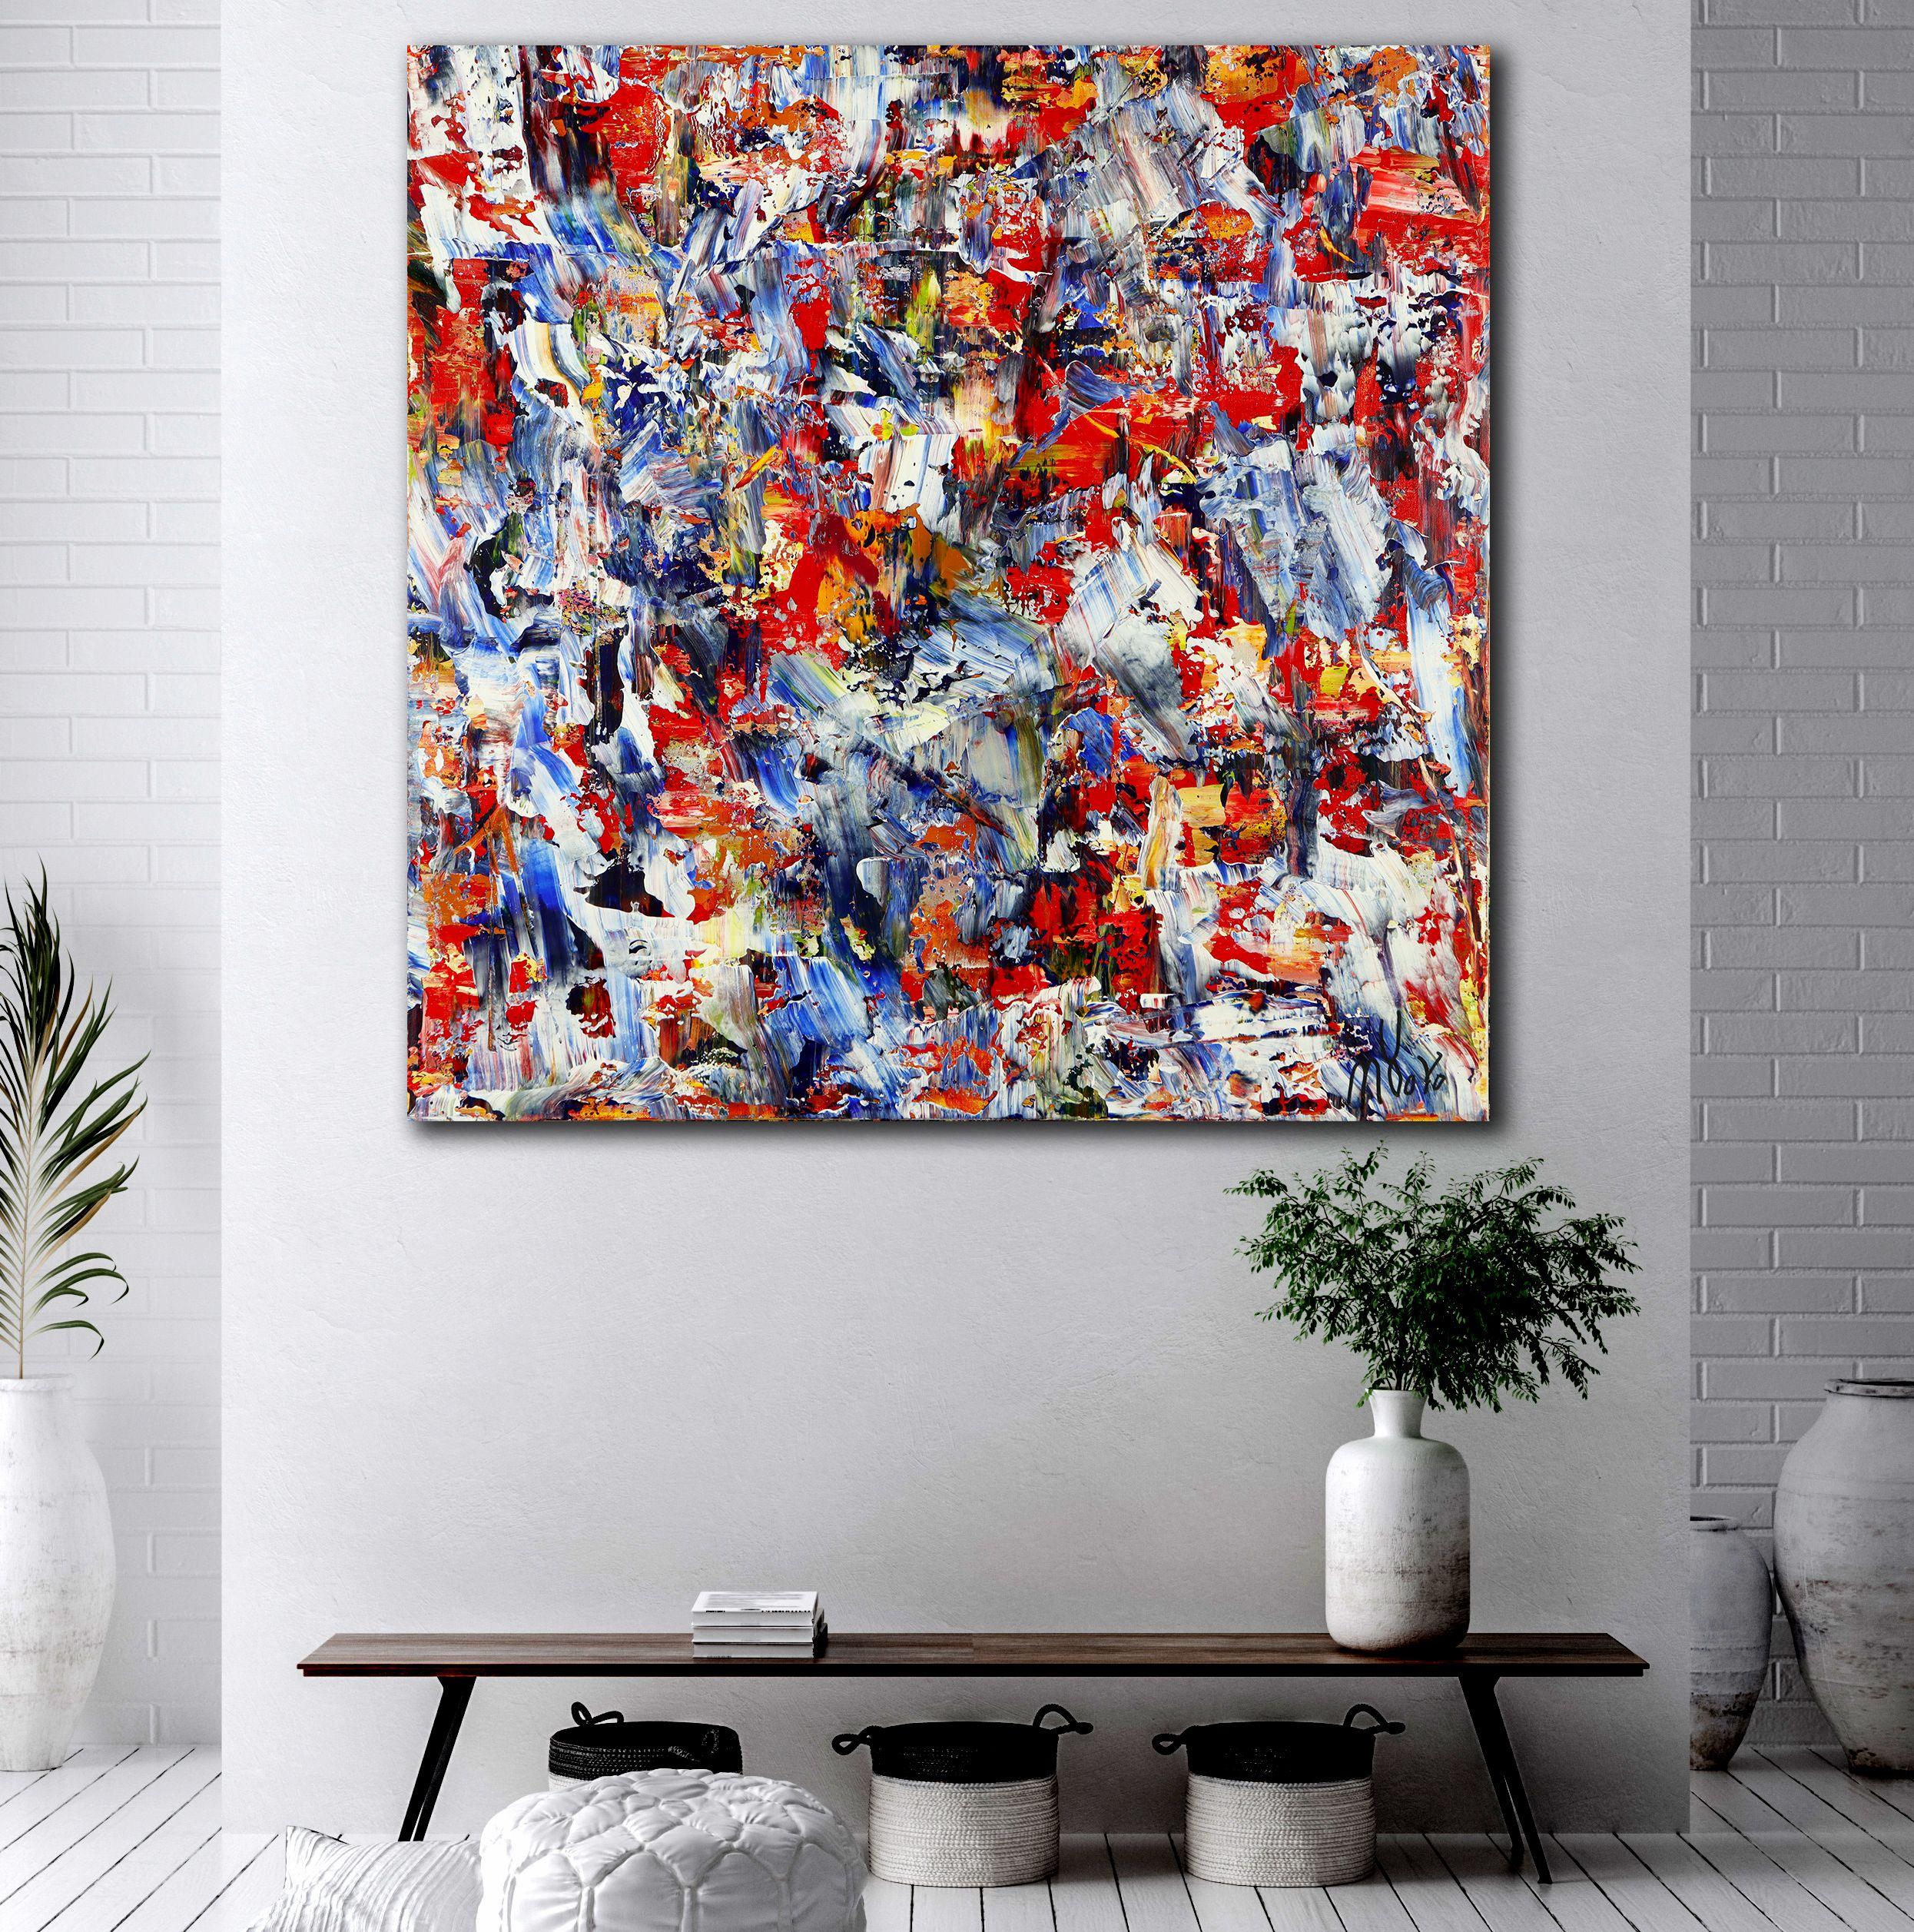 Inspired by nature landscape painting with earthy color blending, contrast and details. Textured with layers of orange, red, silver and yellow! Intricate details (see close-ups).    This artwork its glossy with fine palette knife details. Signed in